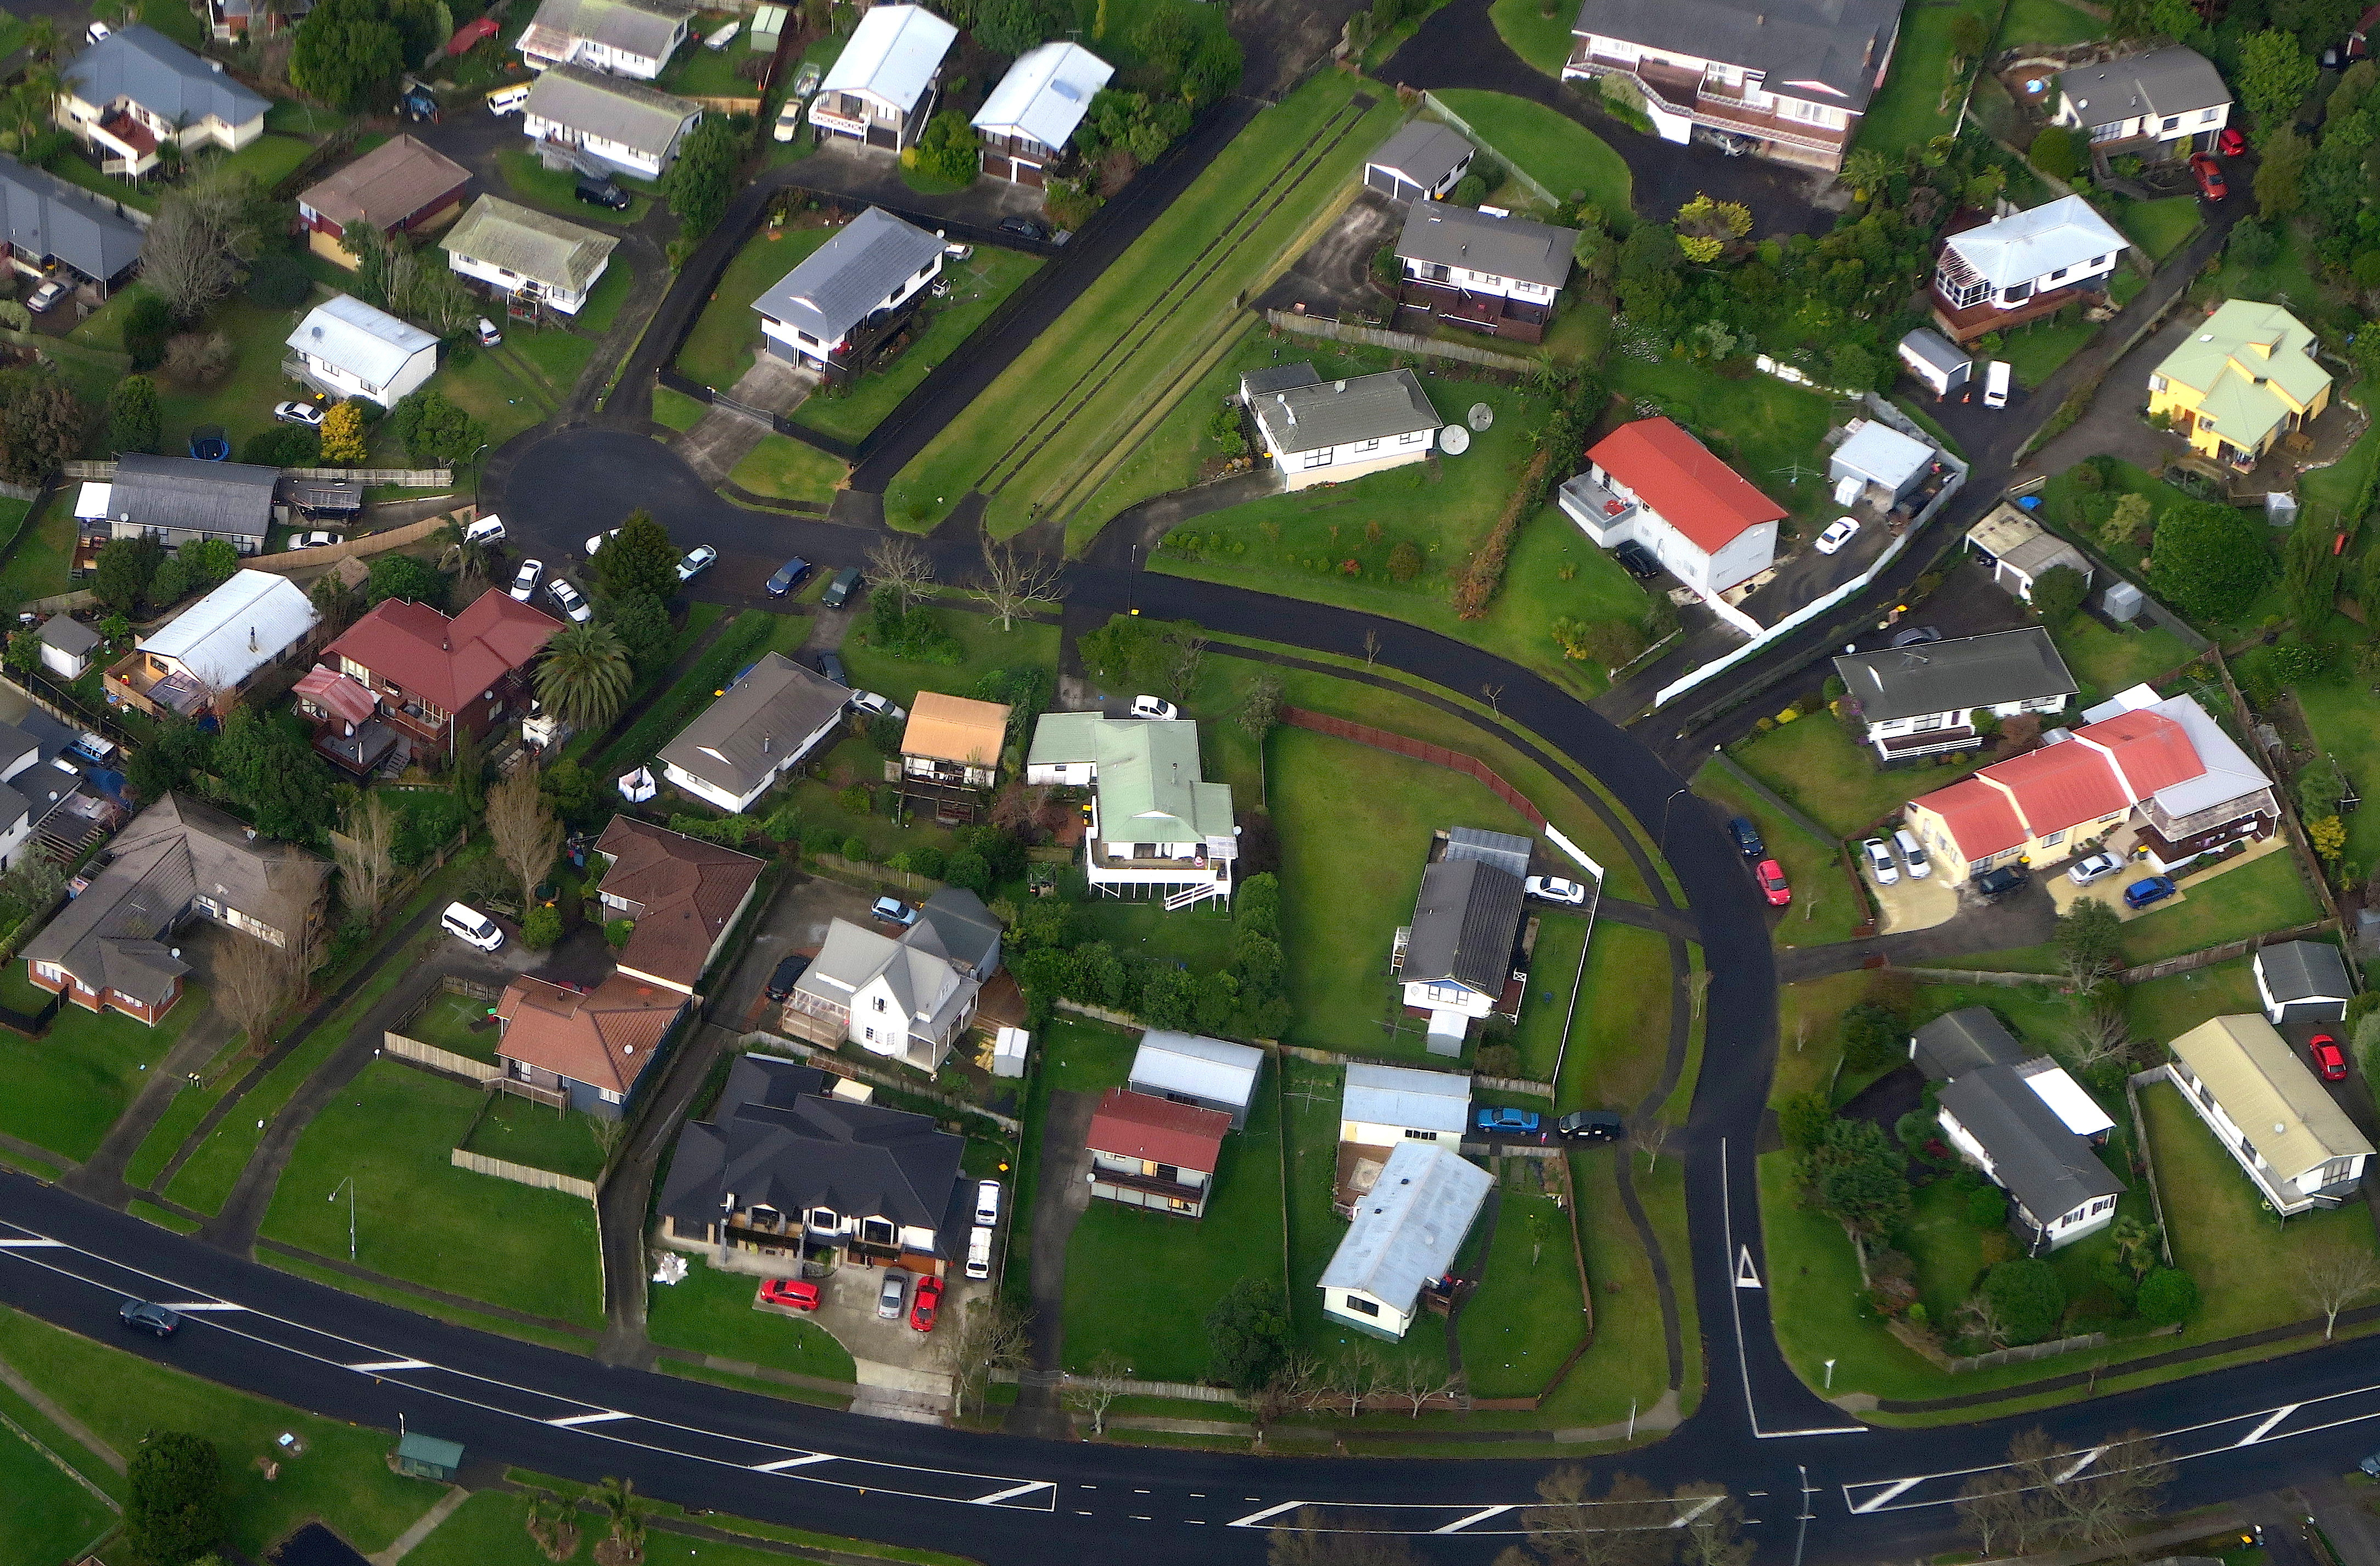 Residential houses can be seen along a road in a suburb of Auckland in New Zealand